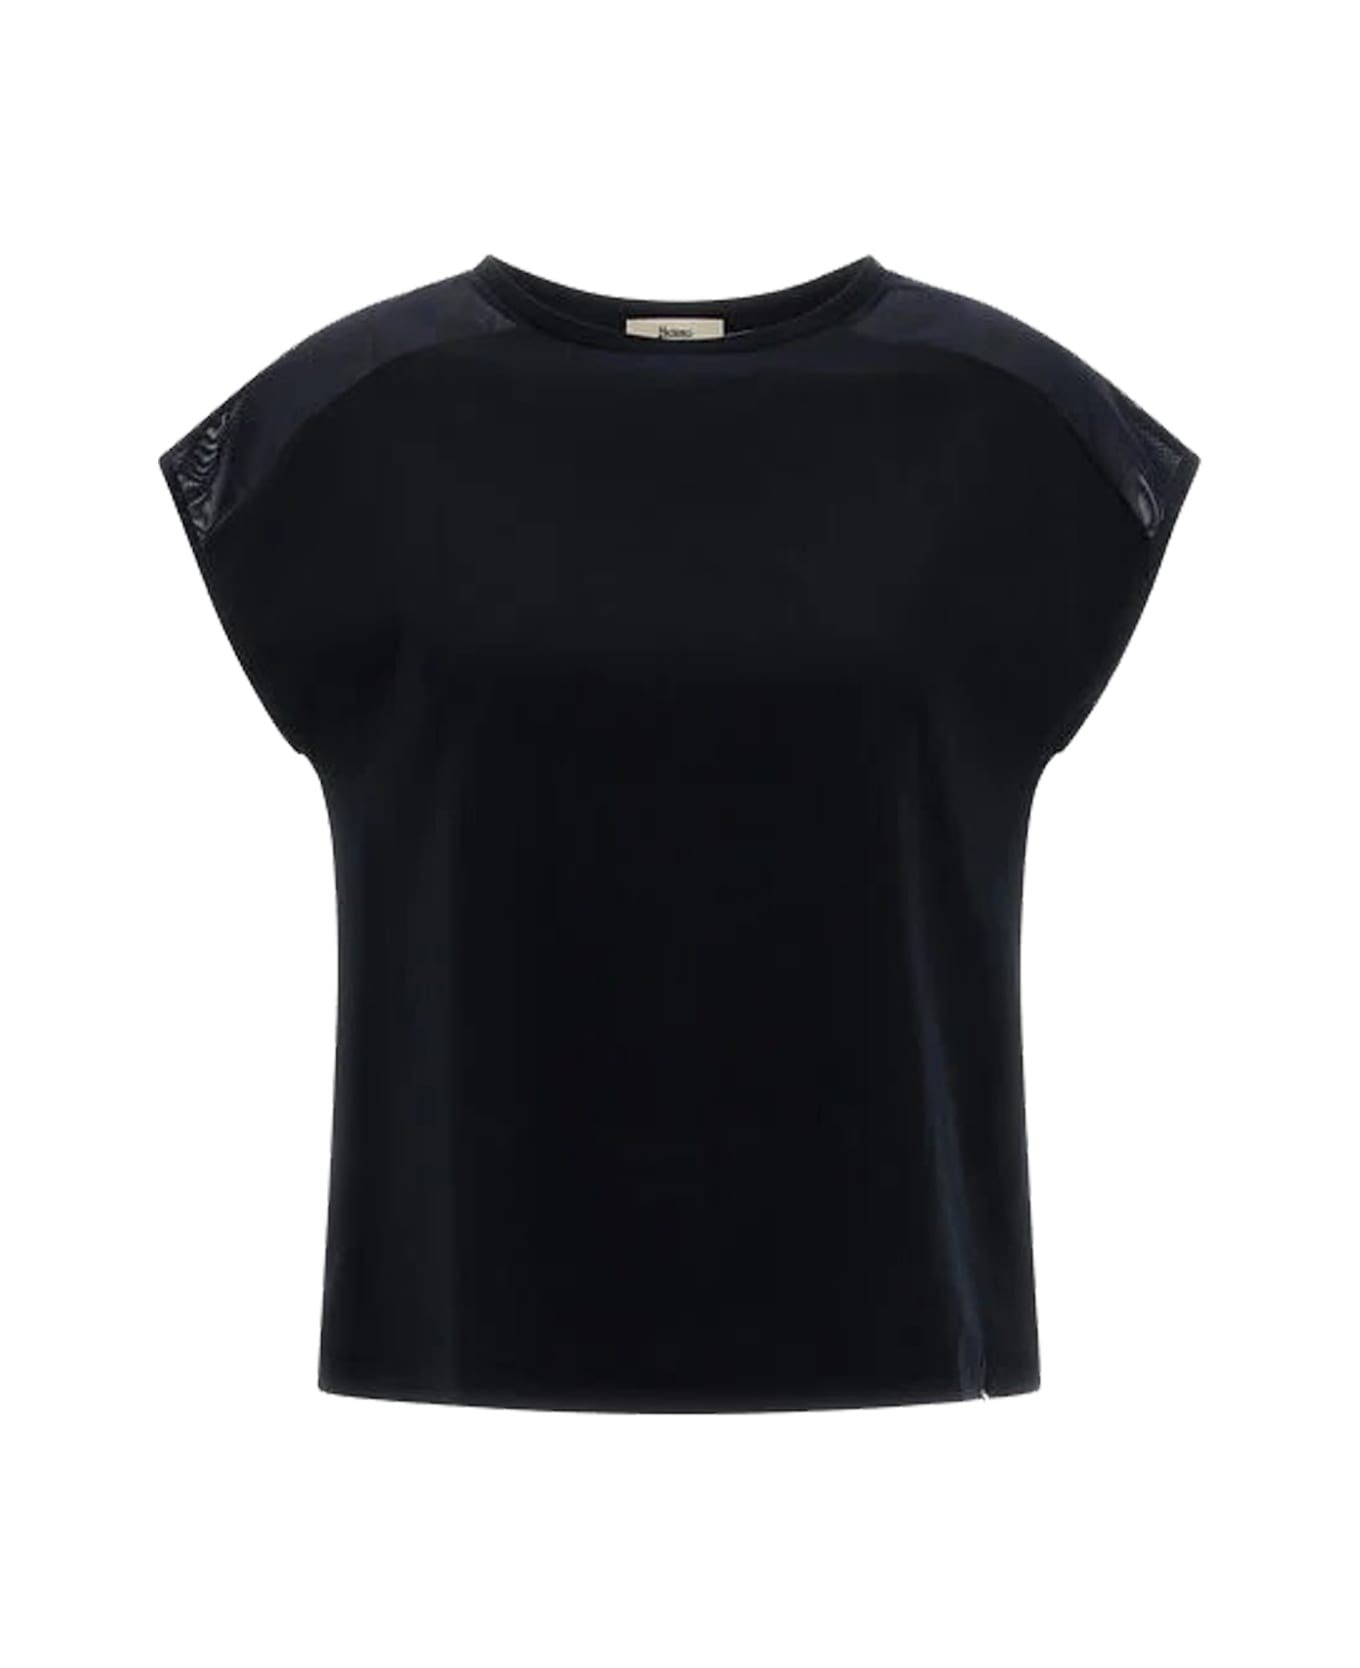 Herno Top - Black トップス